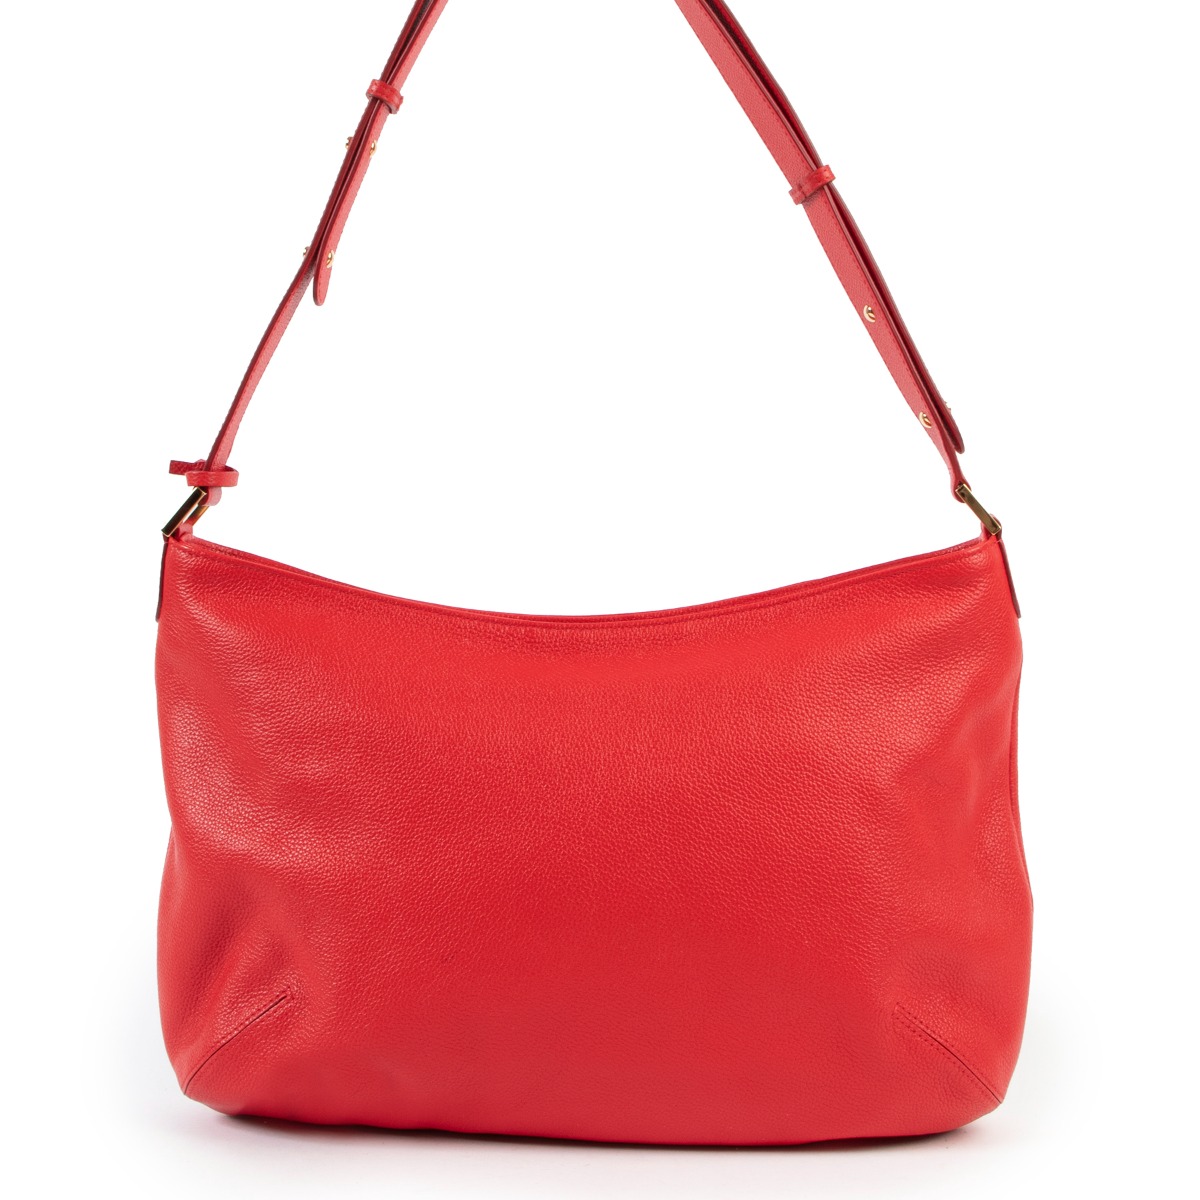 LABELLOV - Make heads turn with this stunning vibrant red Delvaux